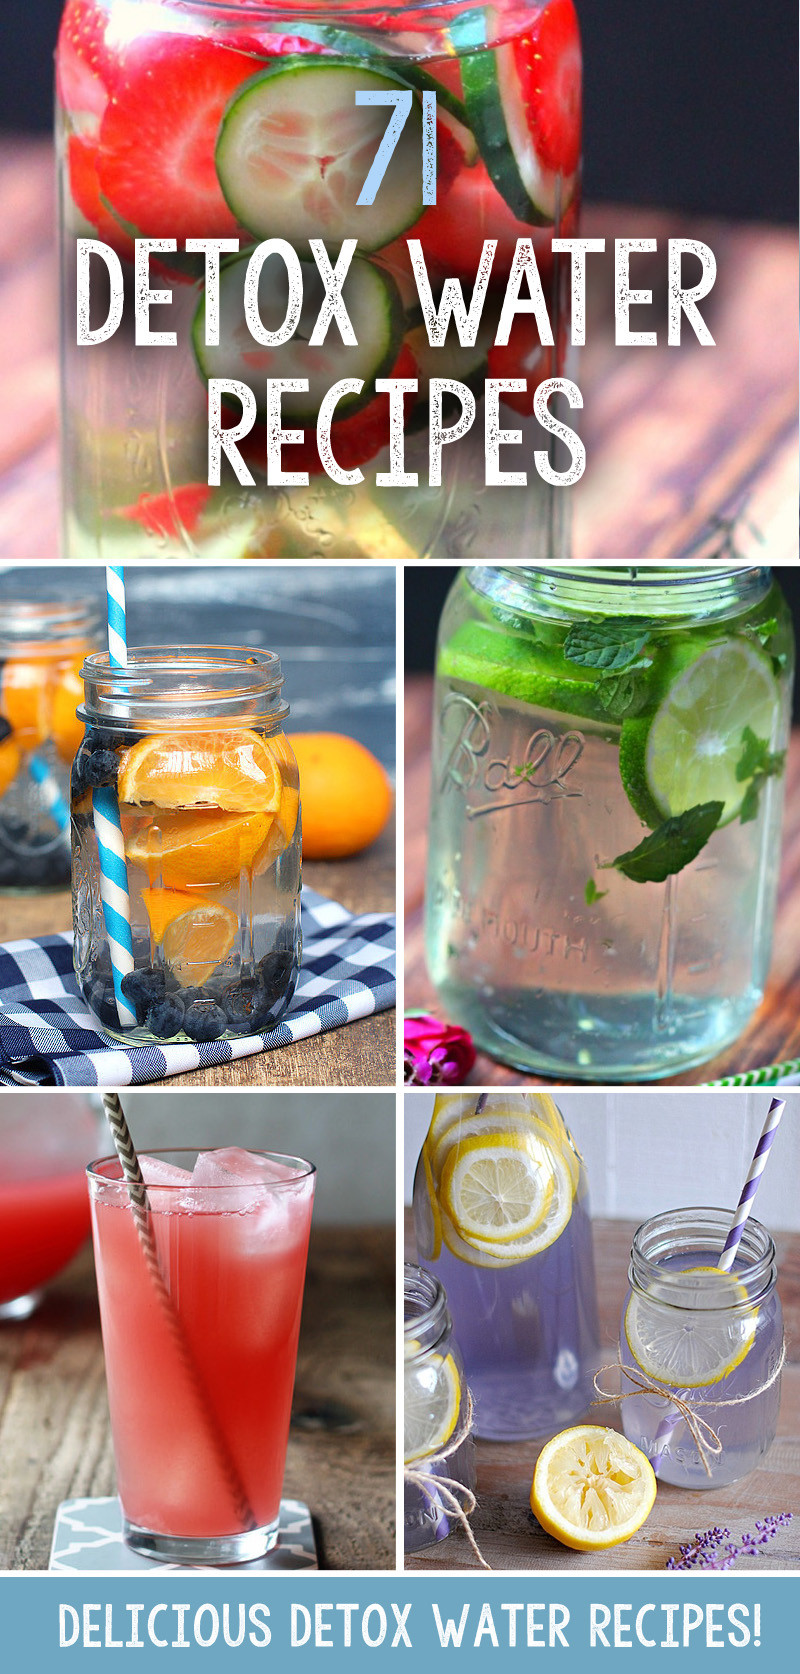 Detox Water For Weight Loss Recipes
 71 Delicious Detox Water Recipes To Help You Lose Weight Fast